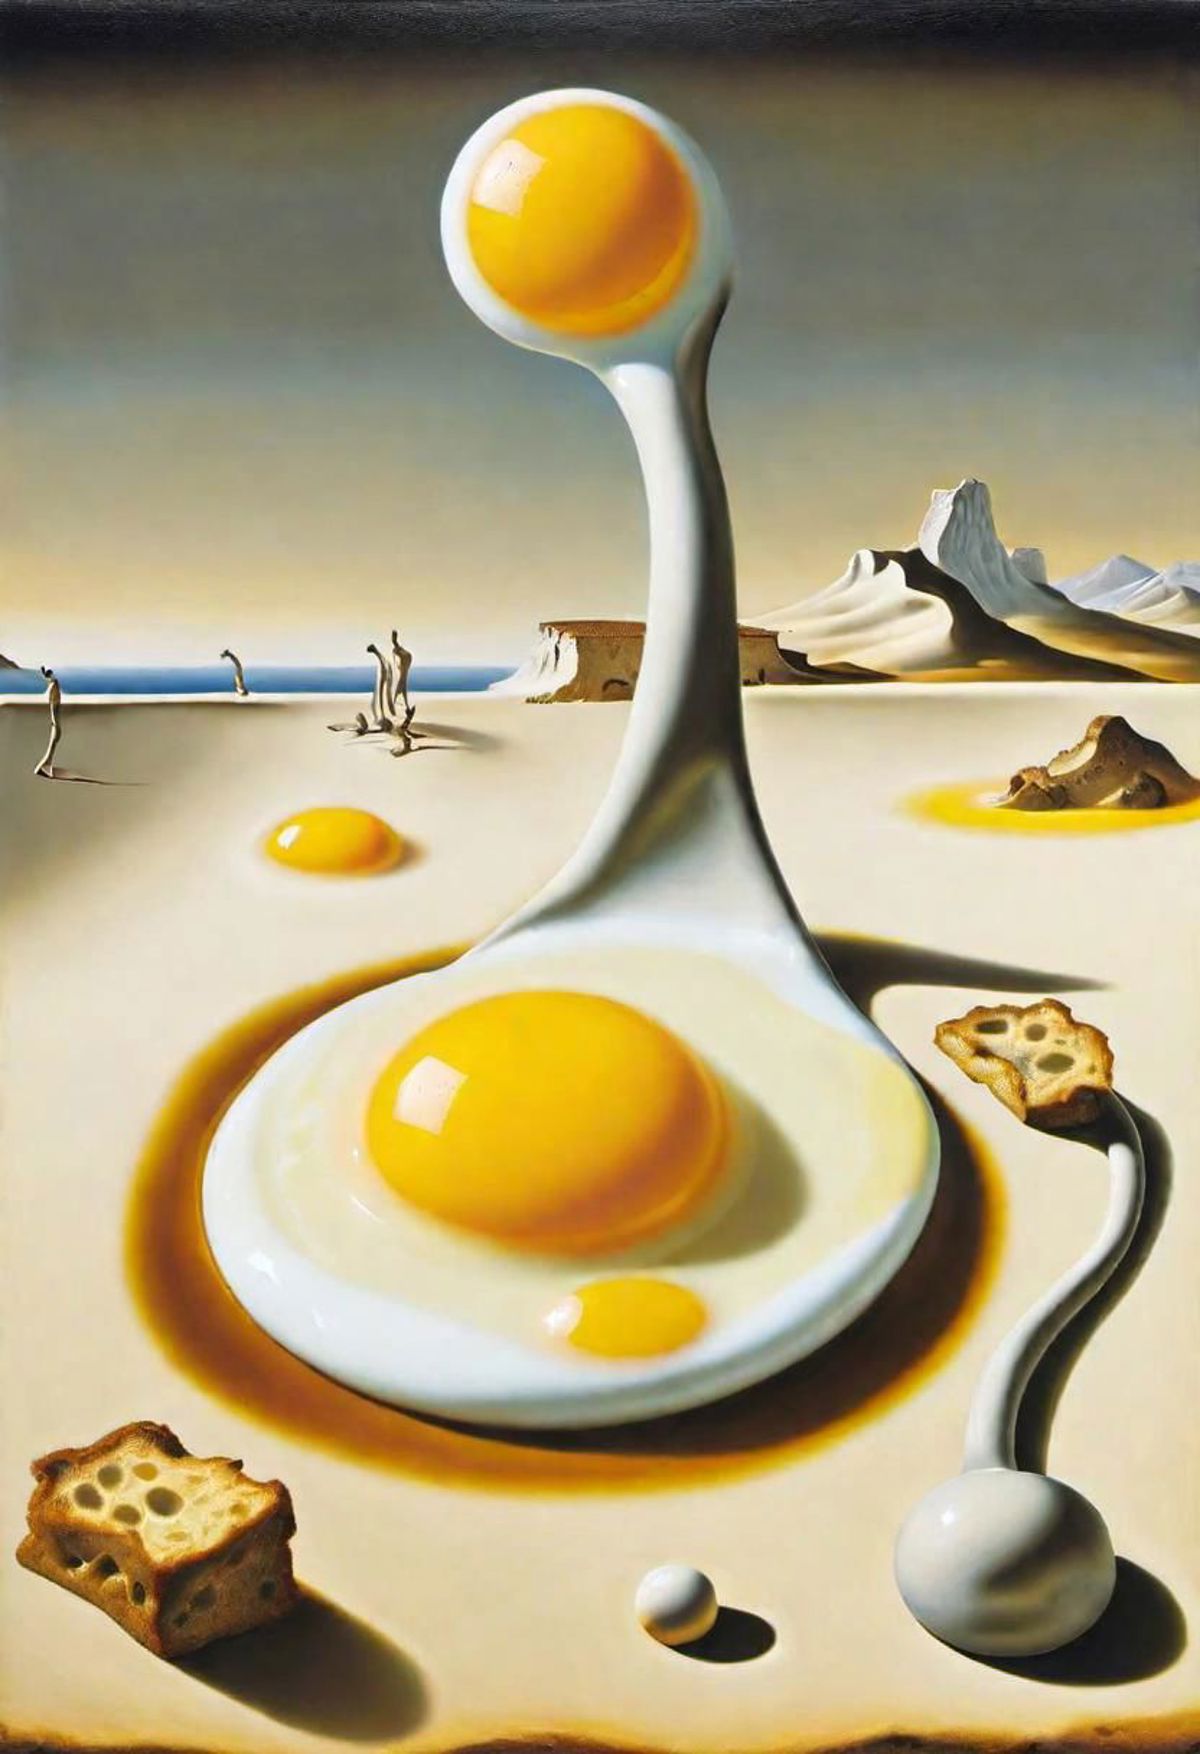 Surrealistic Painting of Yellow Egg in Bowl on Table.